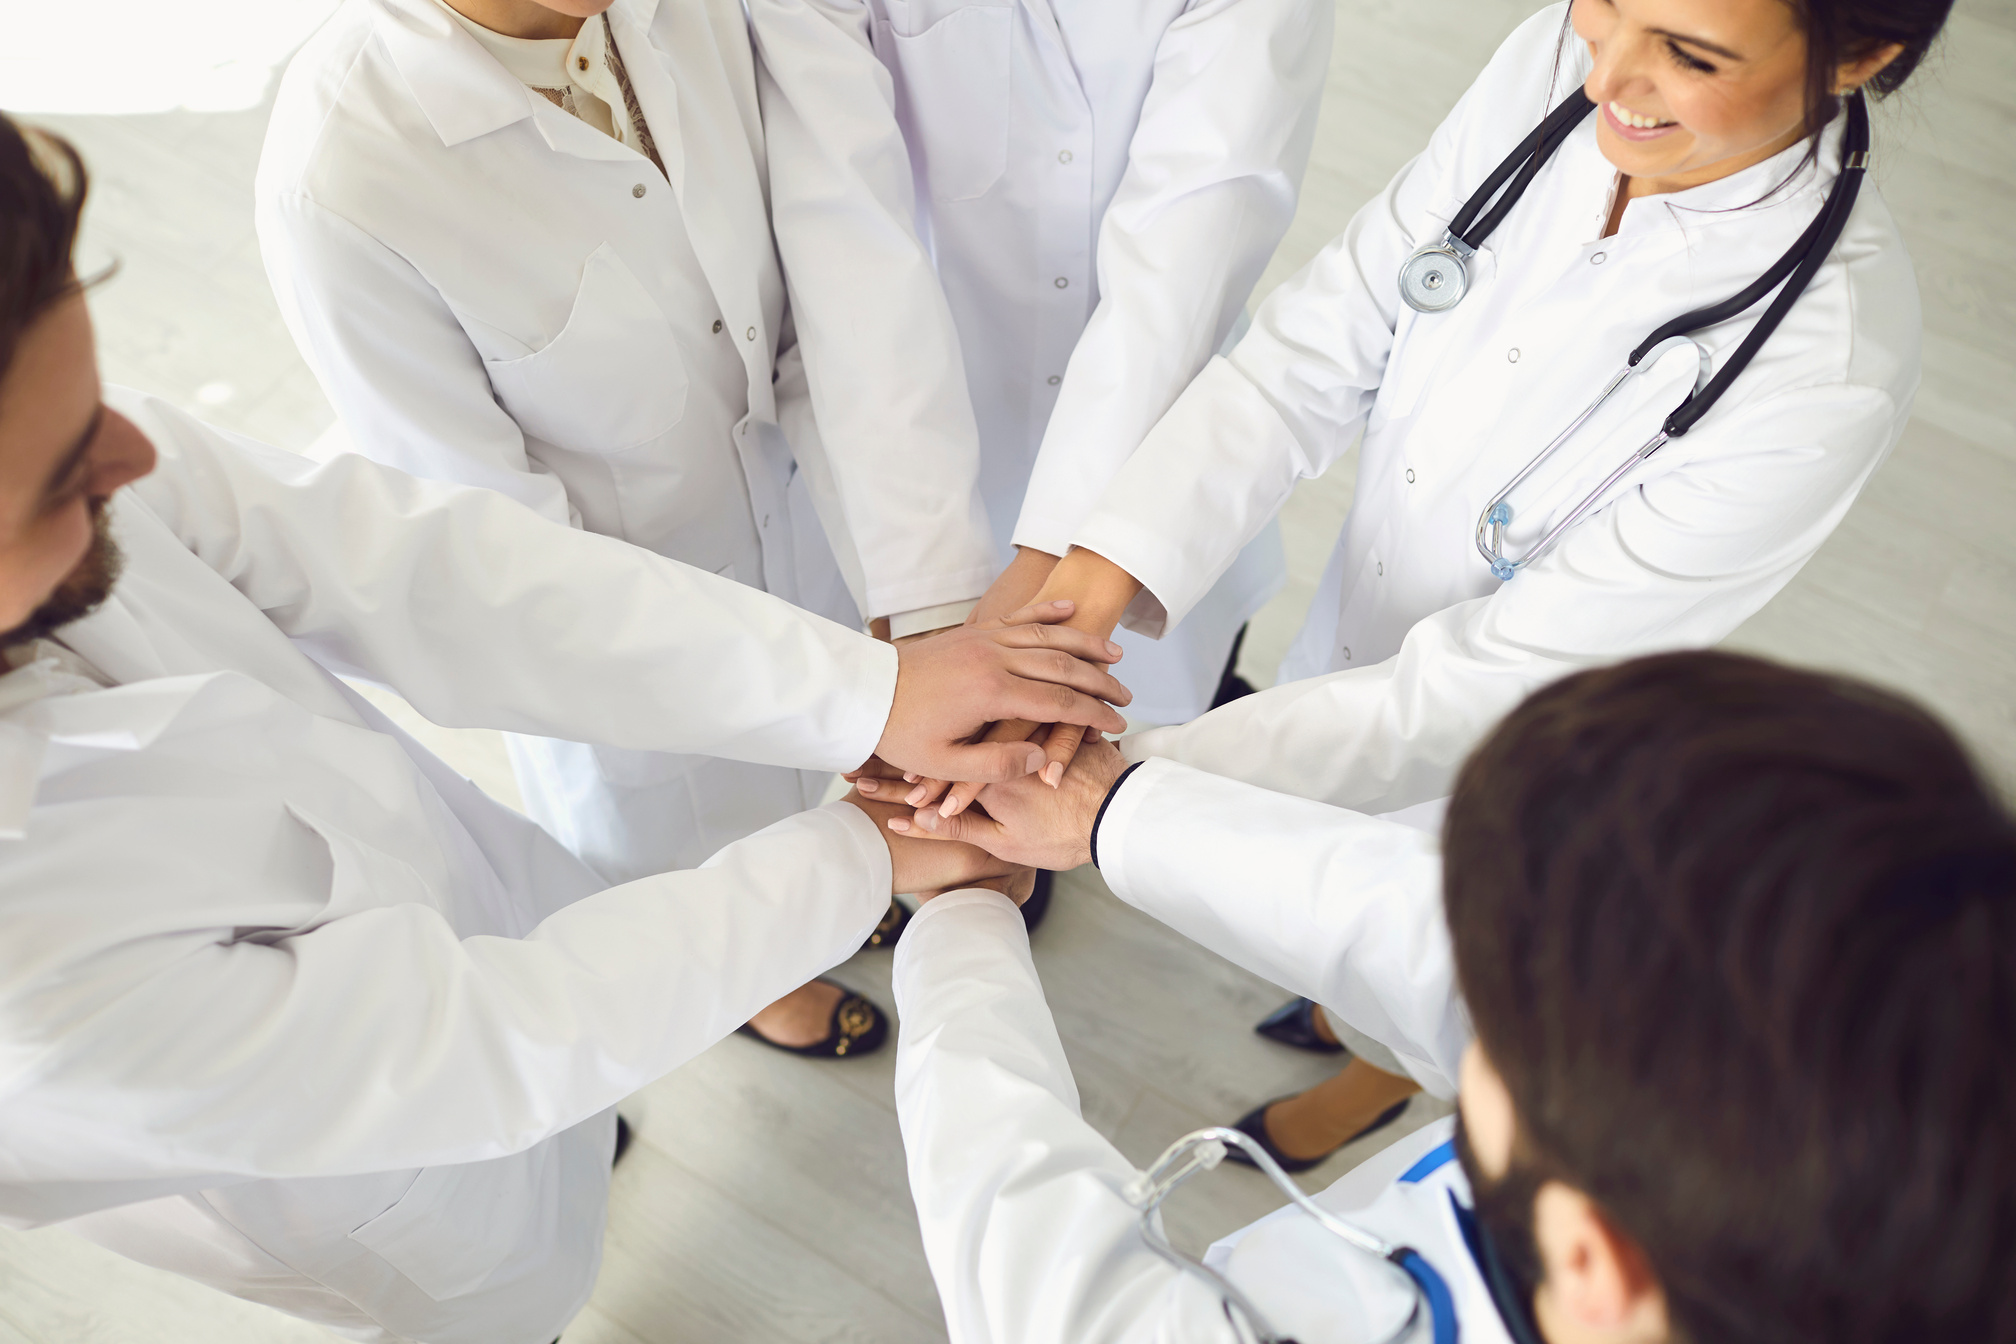 Group of Doctors Joined Hands Together. Medicine Healthcare Clinic Hospital Concept .